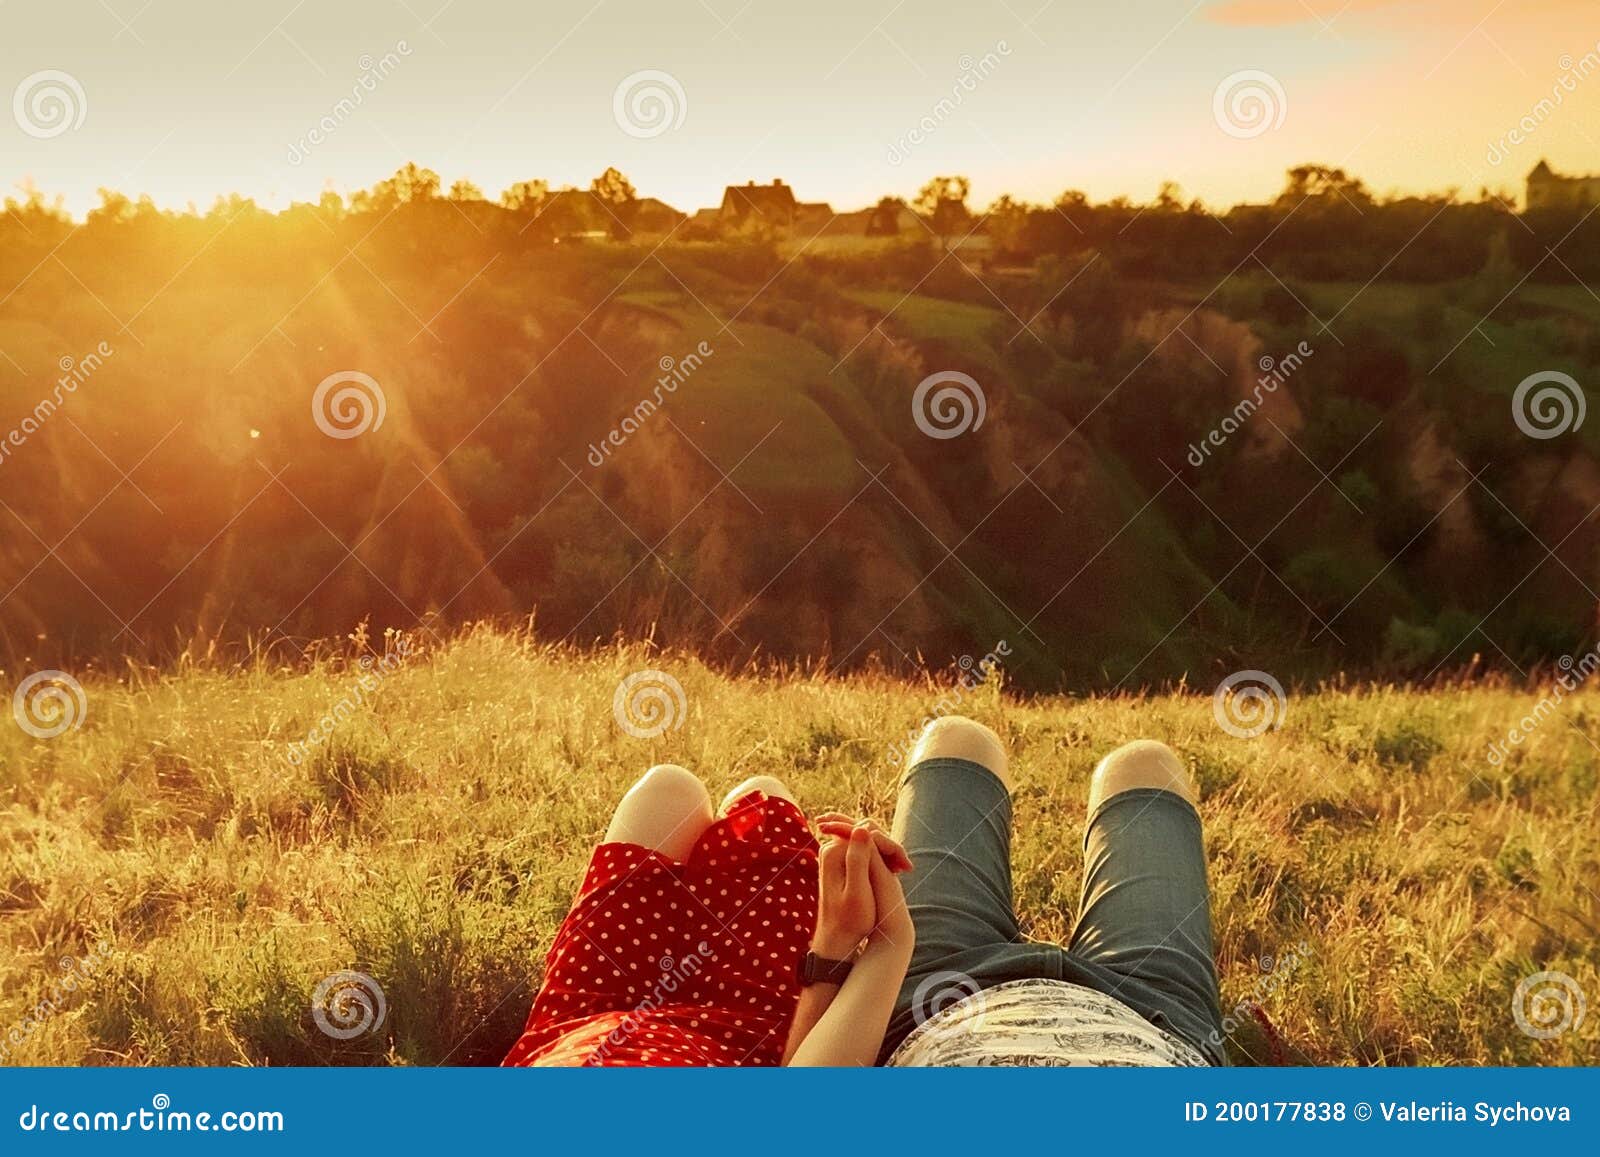 Guy and Girl Lie on the Grass, Top View. Romantic Date at Sunset in a ...